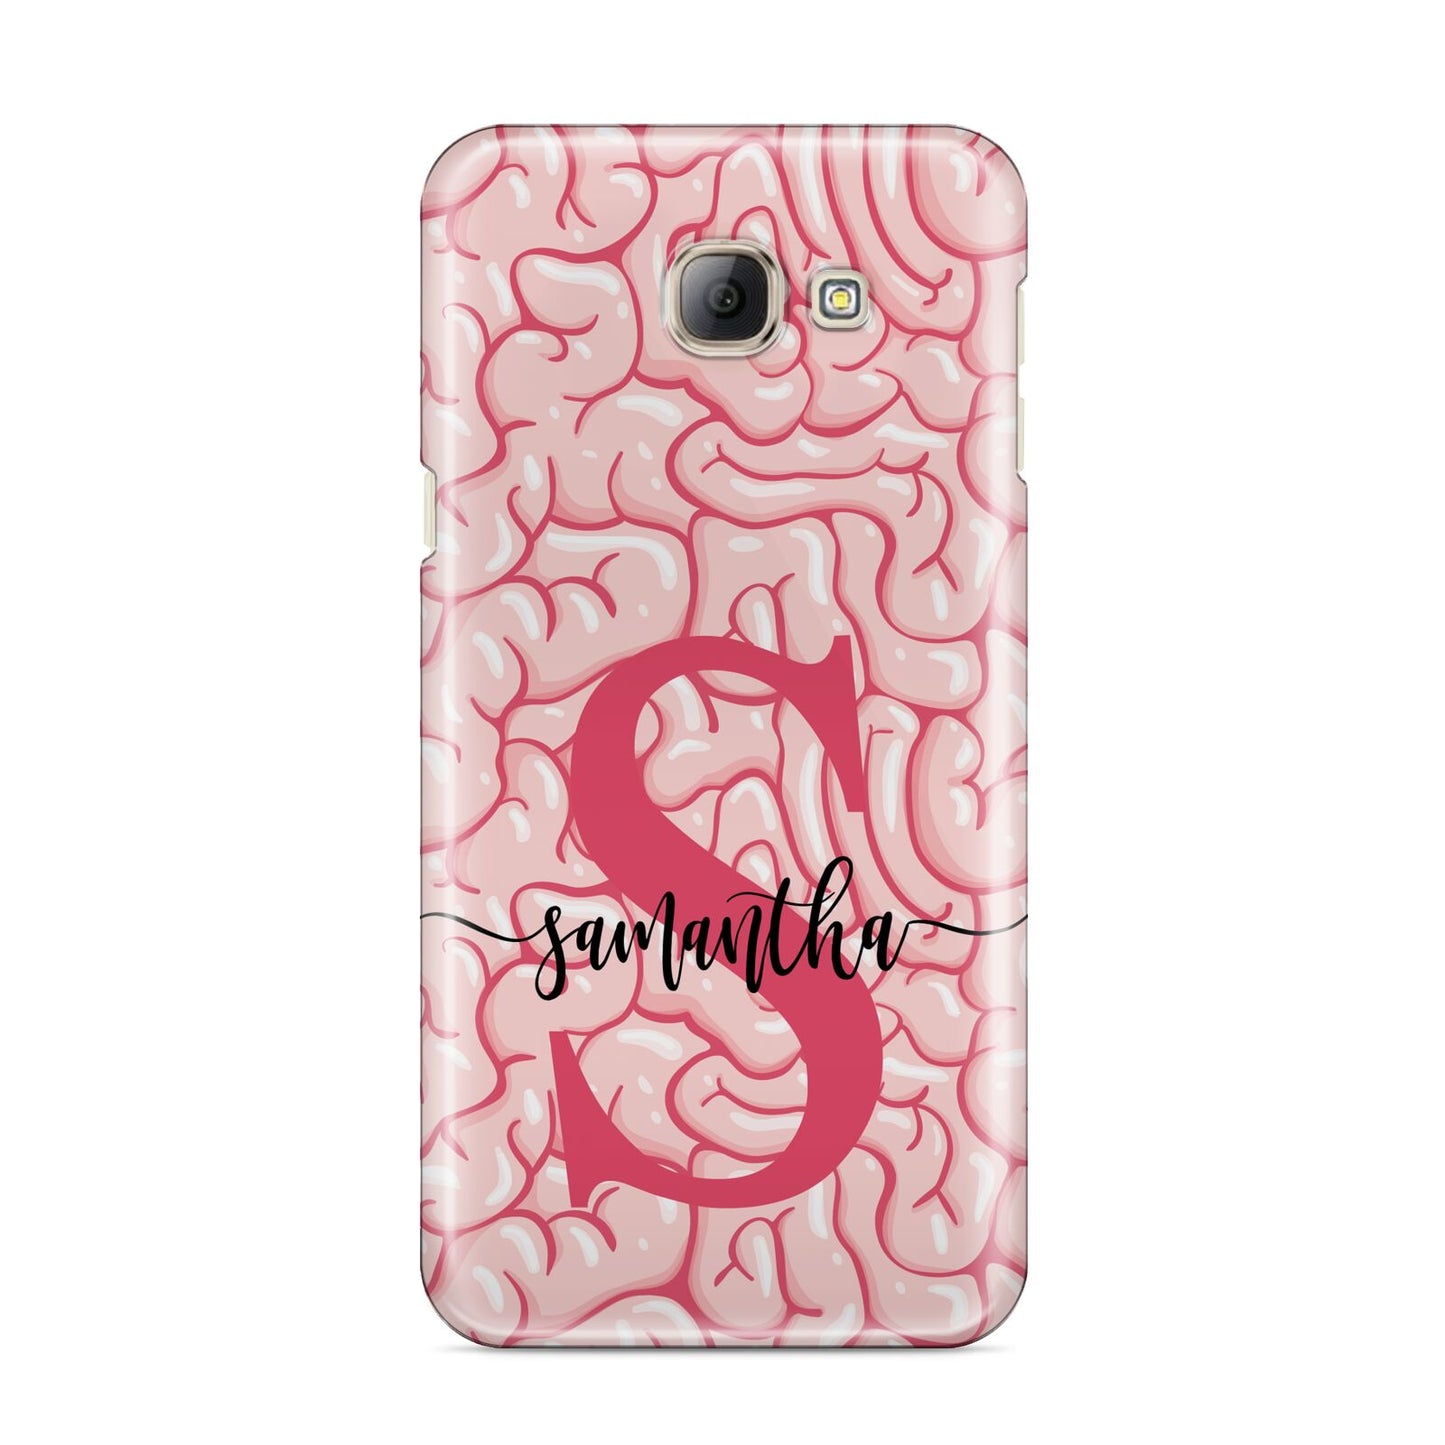 Brain Background with Monogram and Text Samsung Galaxy A8 2016 Case